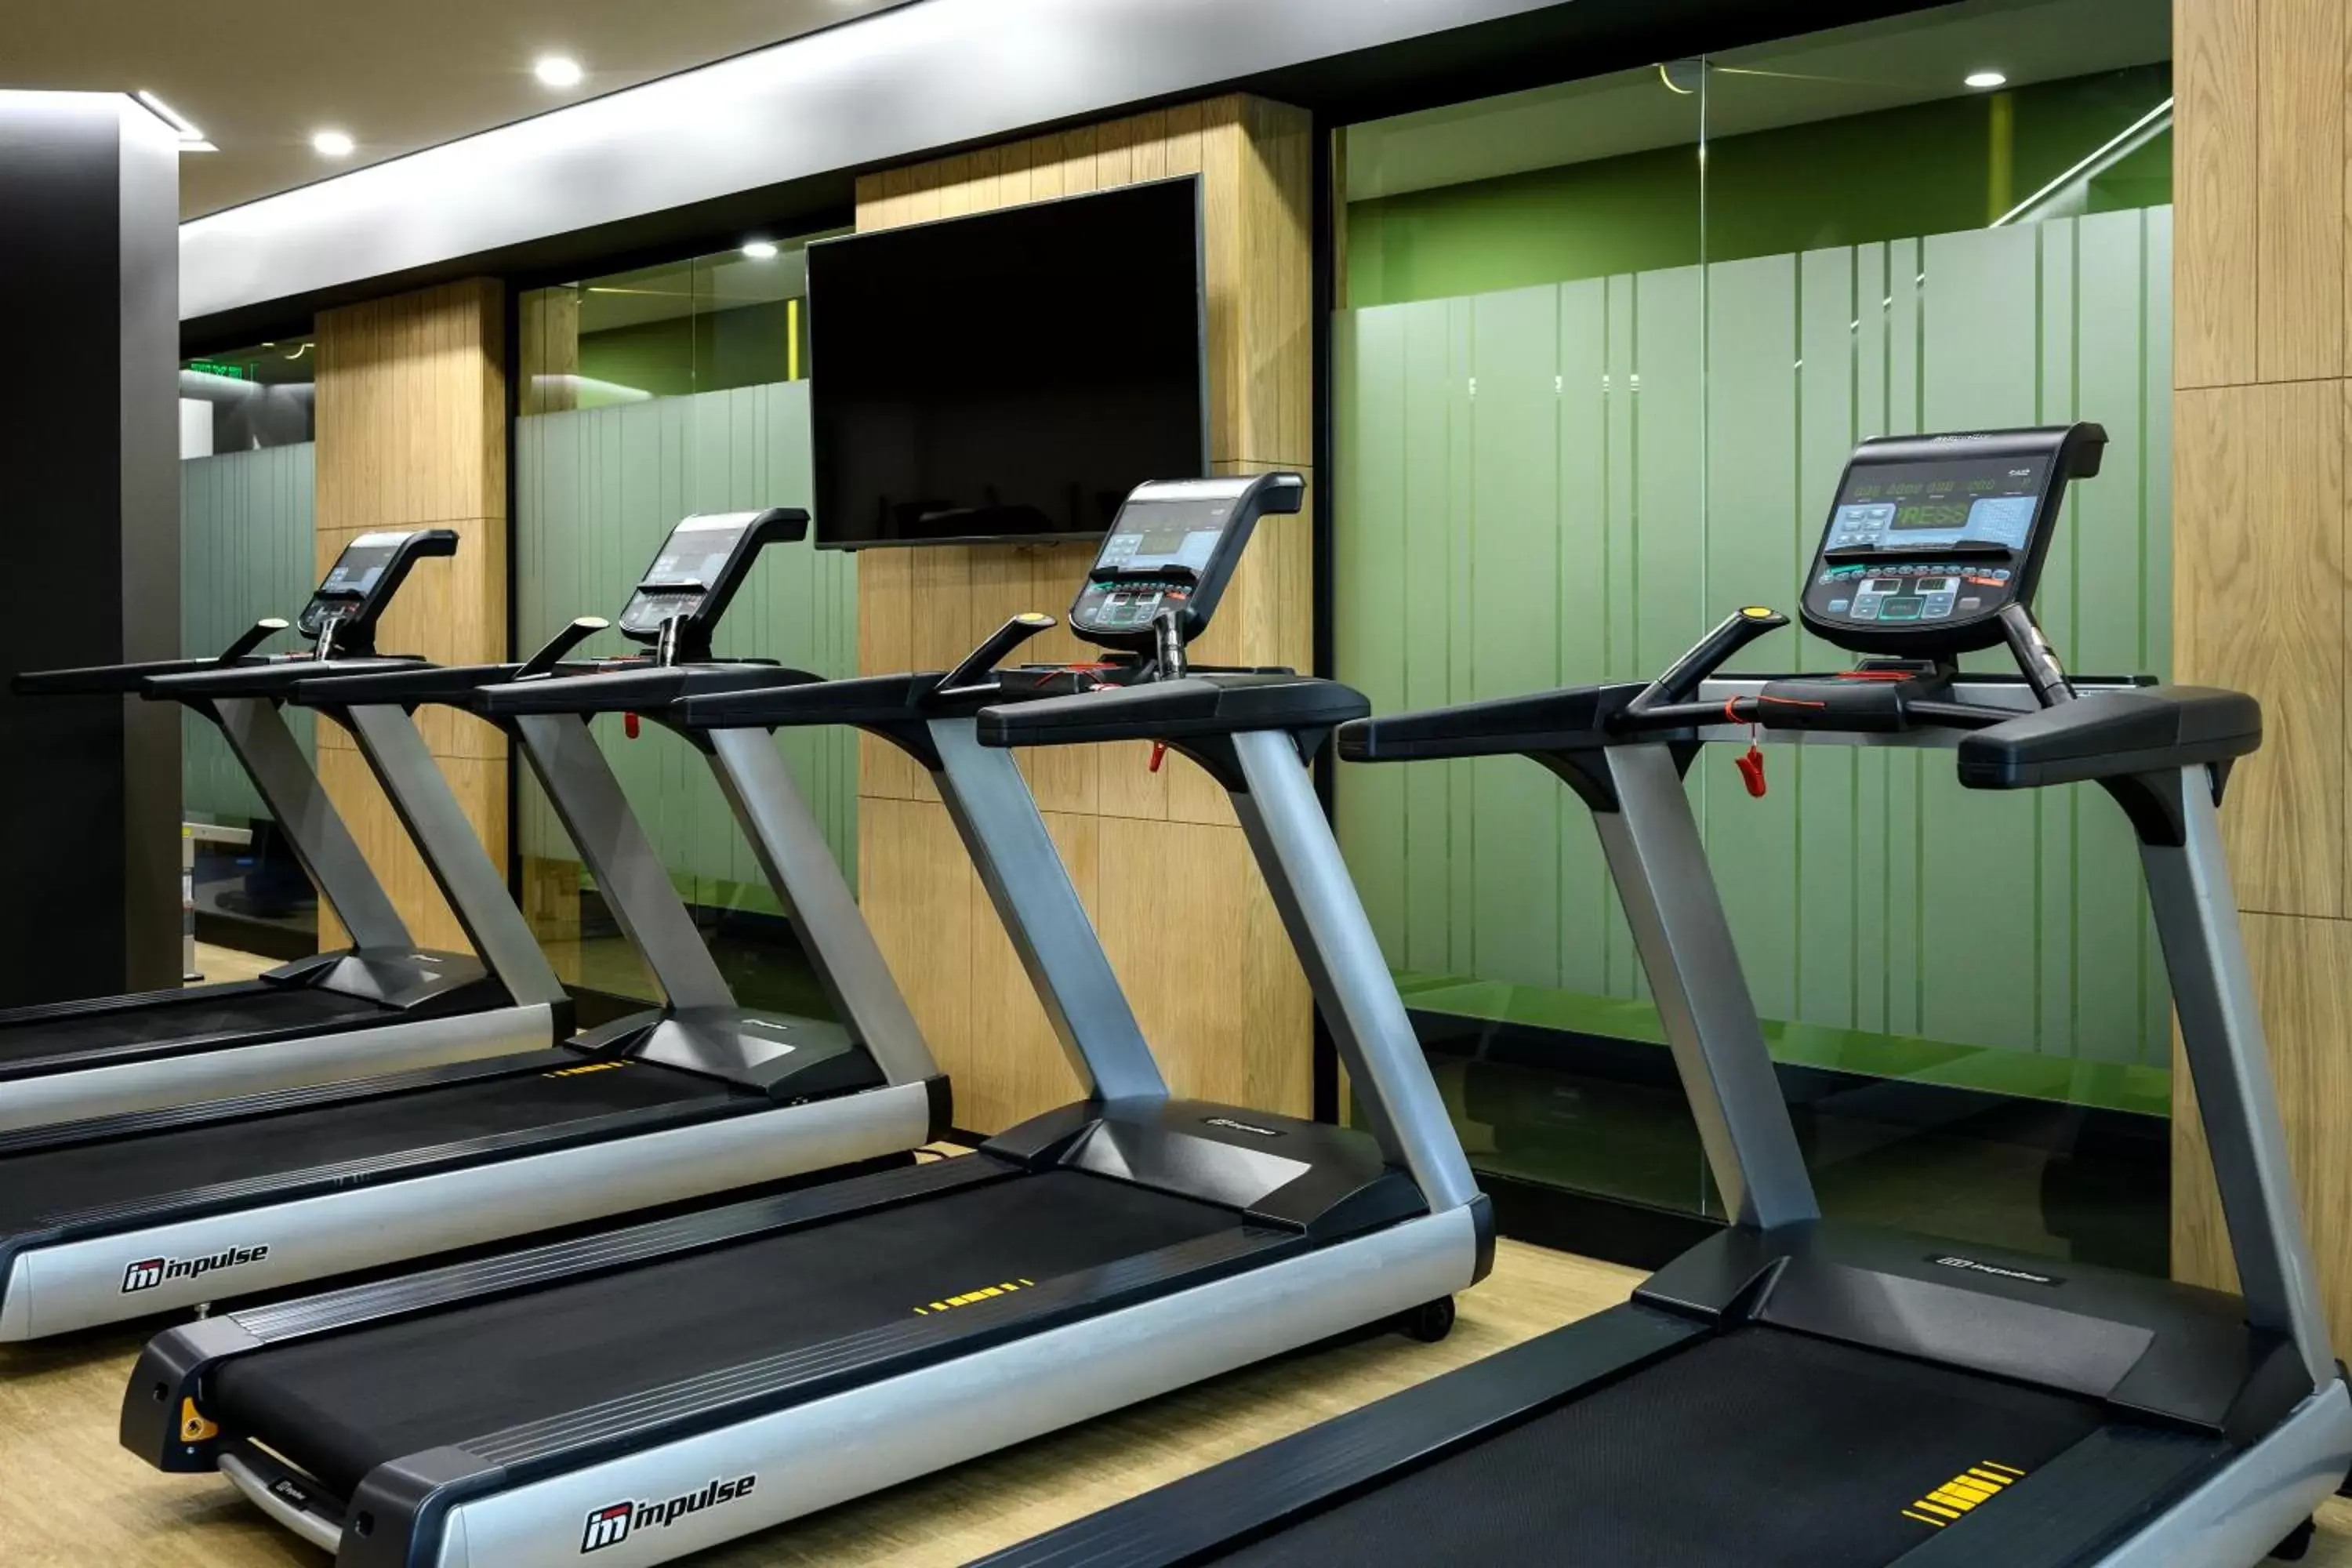 Fitness centre/facilities, Fitness Center/Facilities in North Avenue by Stellar Hotels, Yerevan